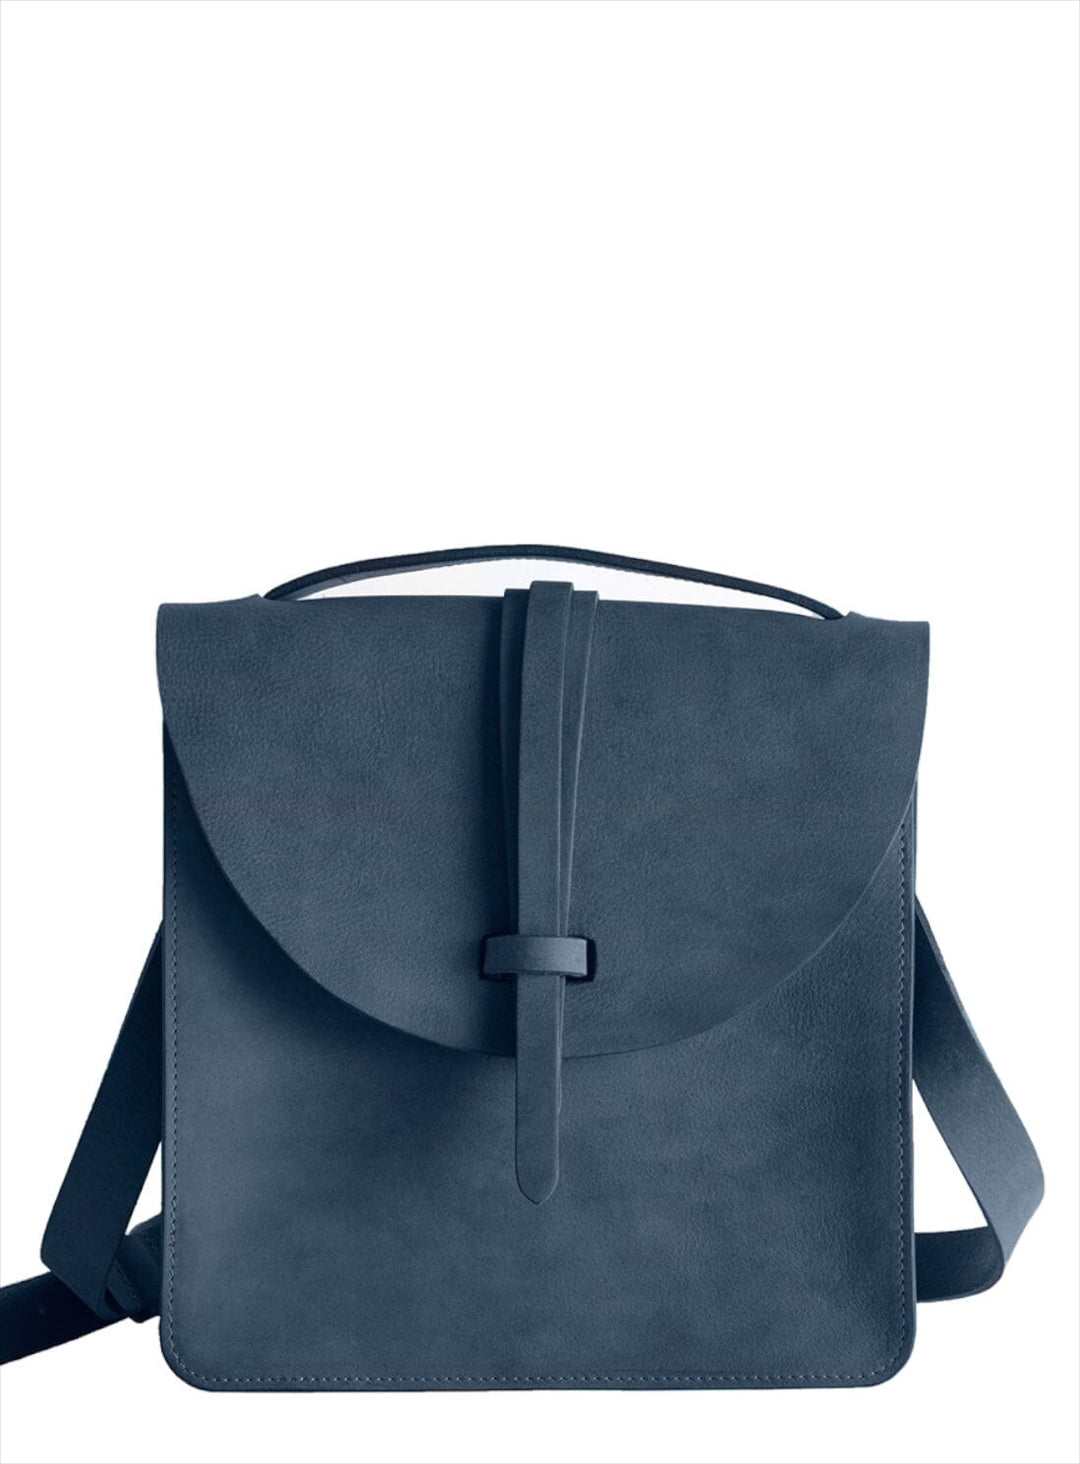 Prussia Bag in Midnight Blue Bags YBDFinds 